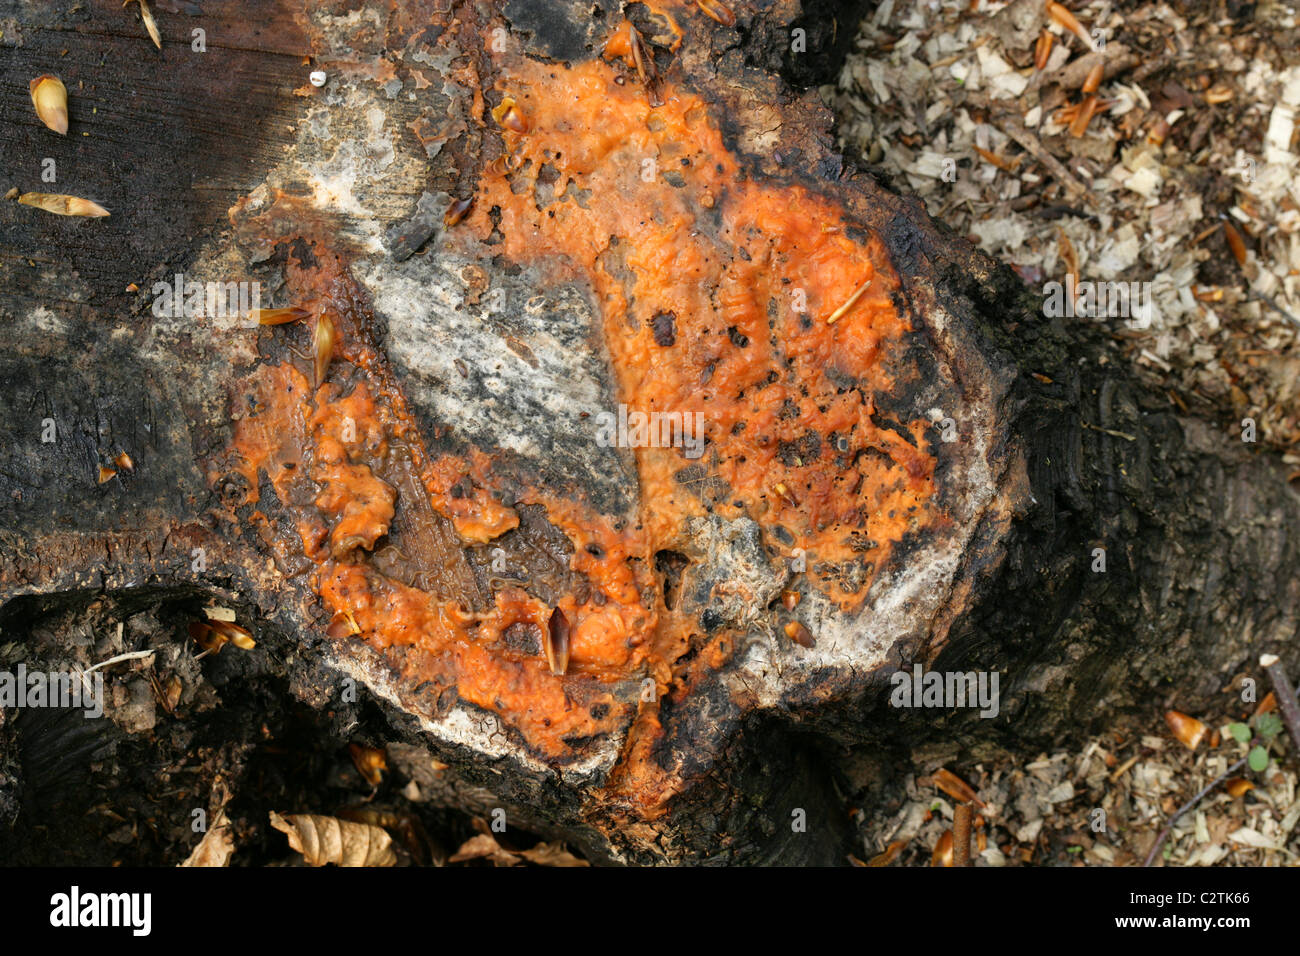 Orange Slime Flux Exuding from a Recently Cut Tree Stump. A Mixture of Microfungi, Yeasts and Bacteria Feeding on Tree Sap. Stock Photo